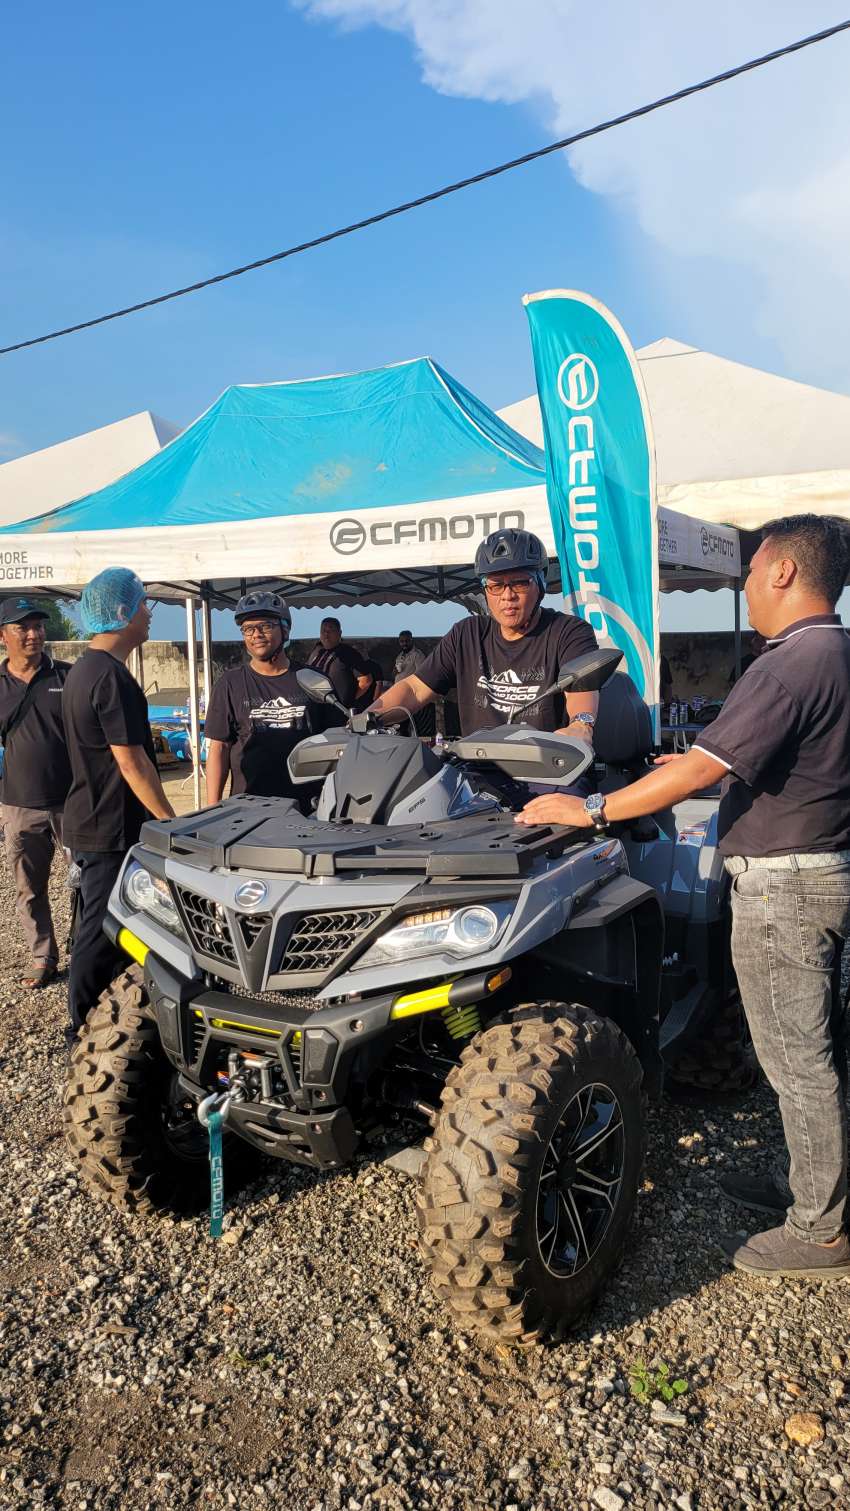 JPJ tests and inspects All-Terrain Vehicles (ATV), Vehicle Ownership Certificate (VOC) required 1476176